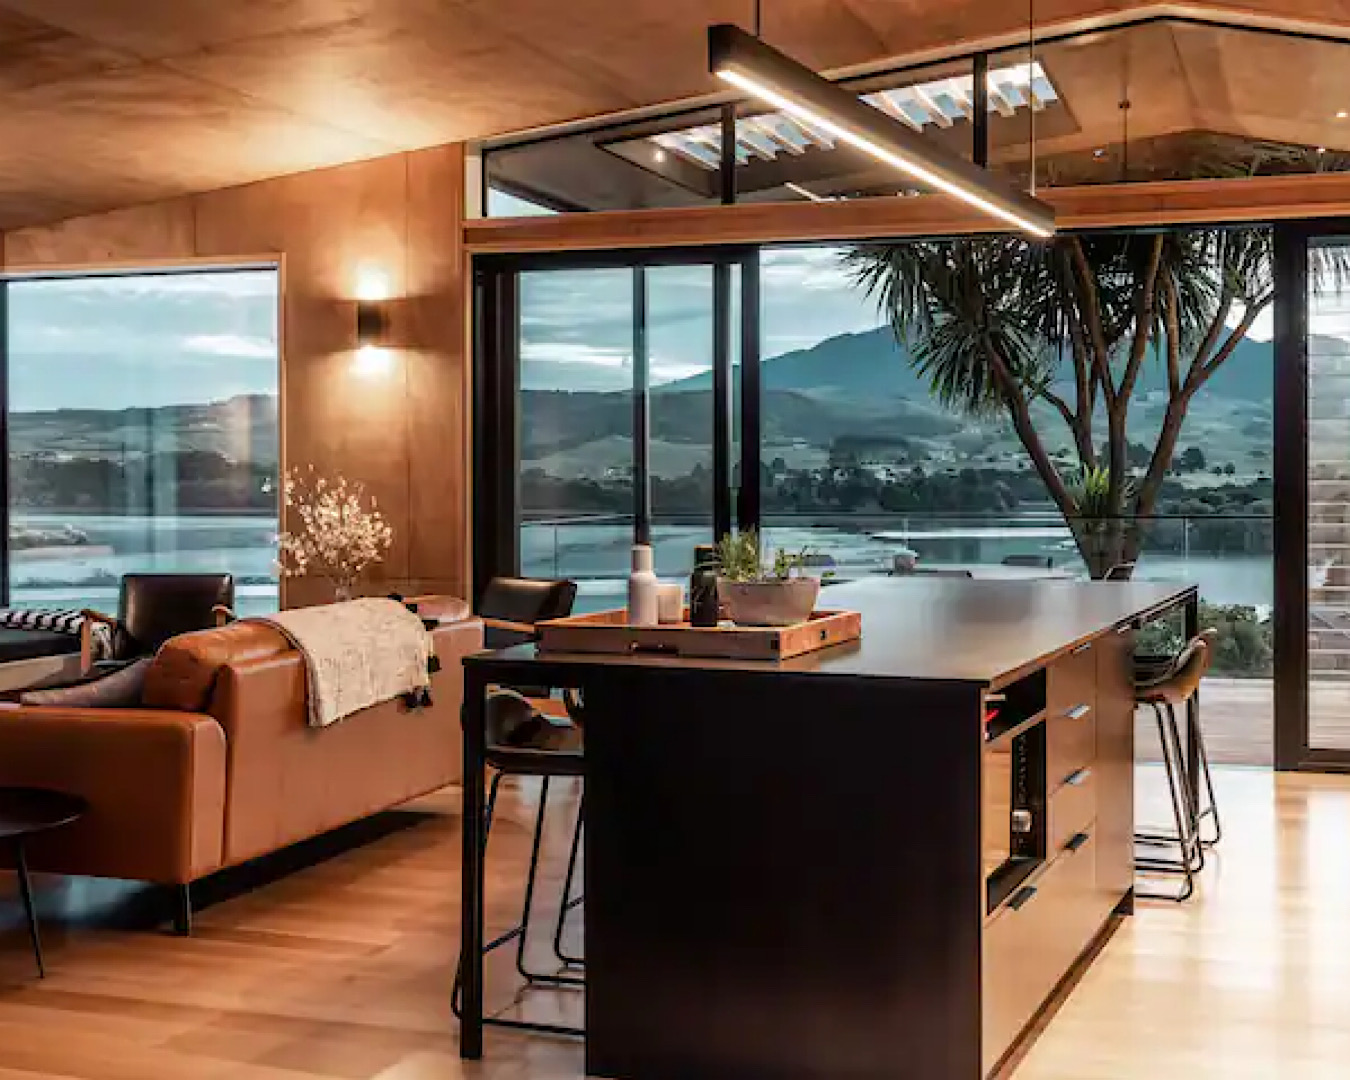 A stunning modern dining-kitchen area that looks out to jaw-dropping views of Kaitoke Bay and Mt Karioi. 